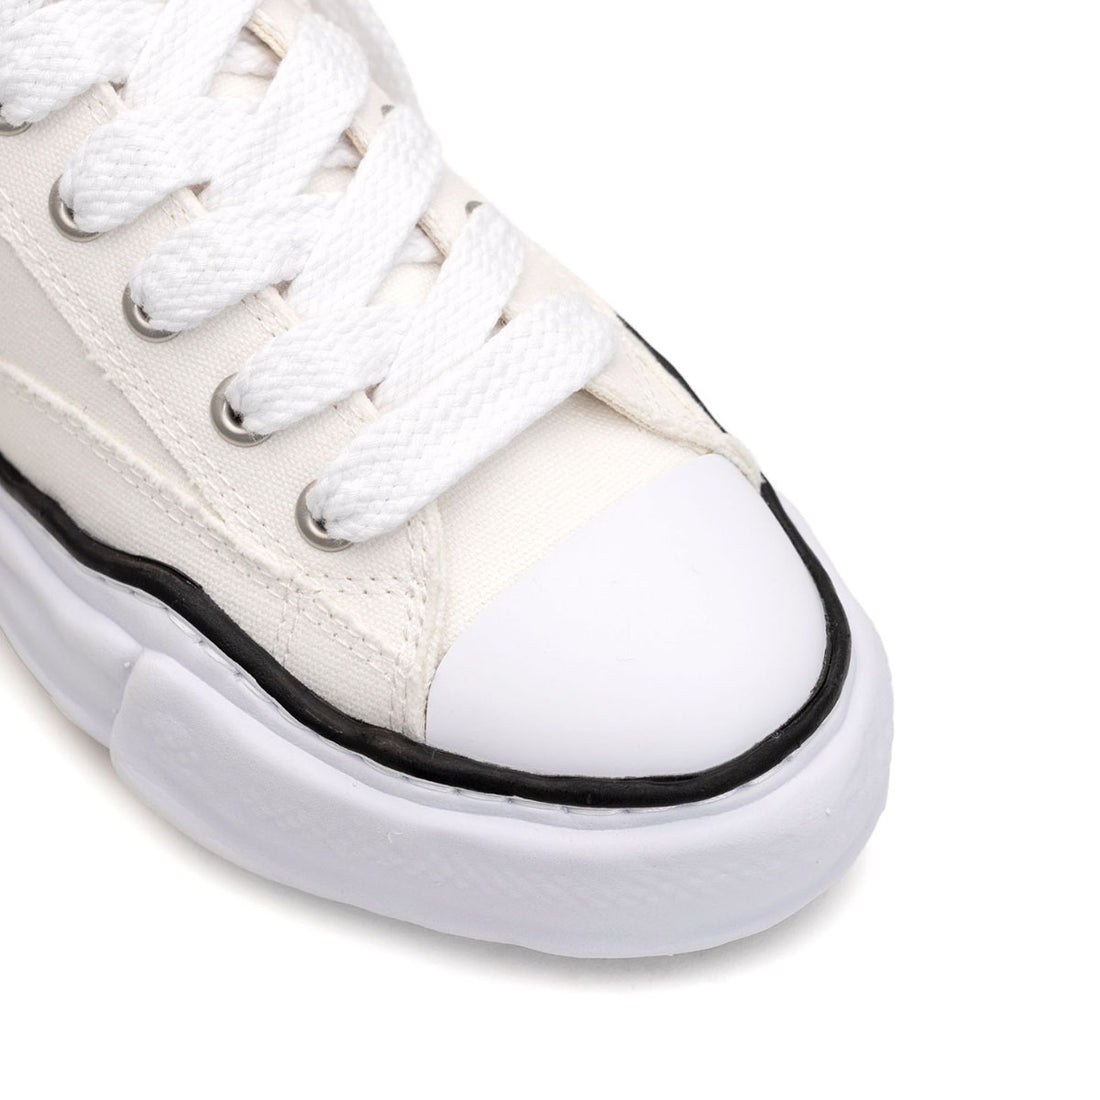 [MAISON MIHARA YASUHIRO]"PETERSON" OG Sole Canvas Low-top Sneaker/WHITE(A01FW702)